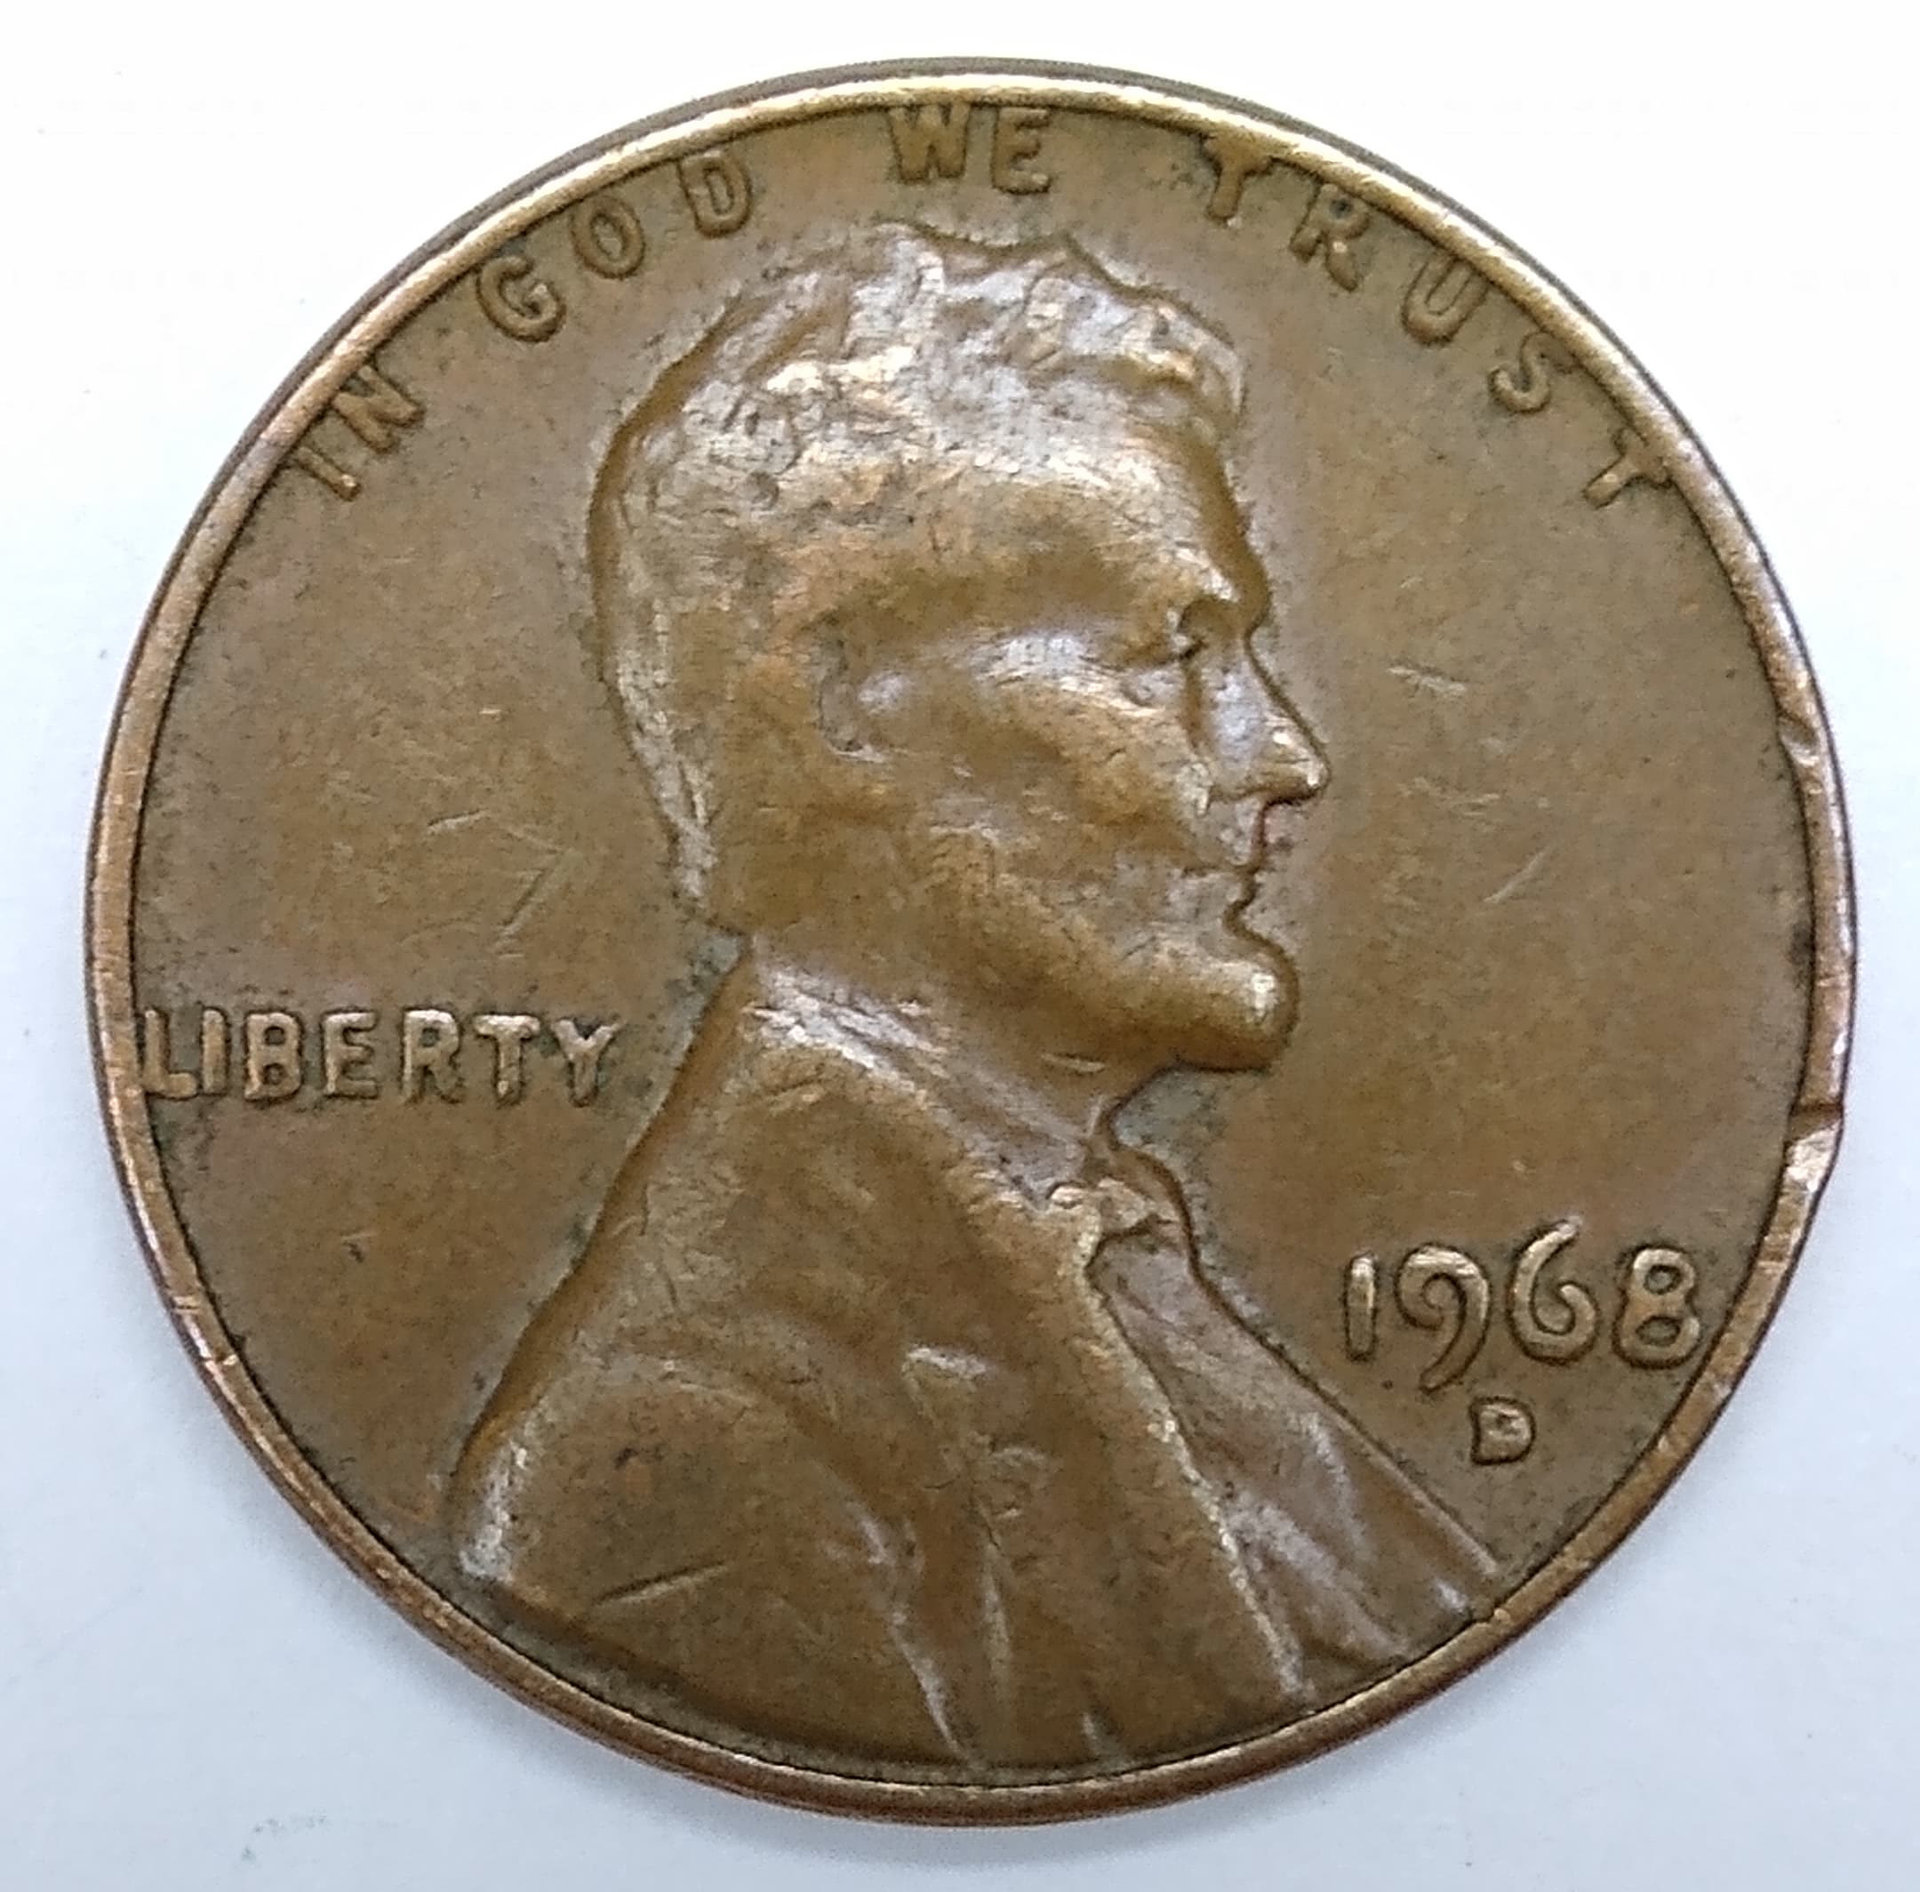 1968D Lincoln Penny Obverse.jpg